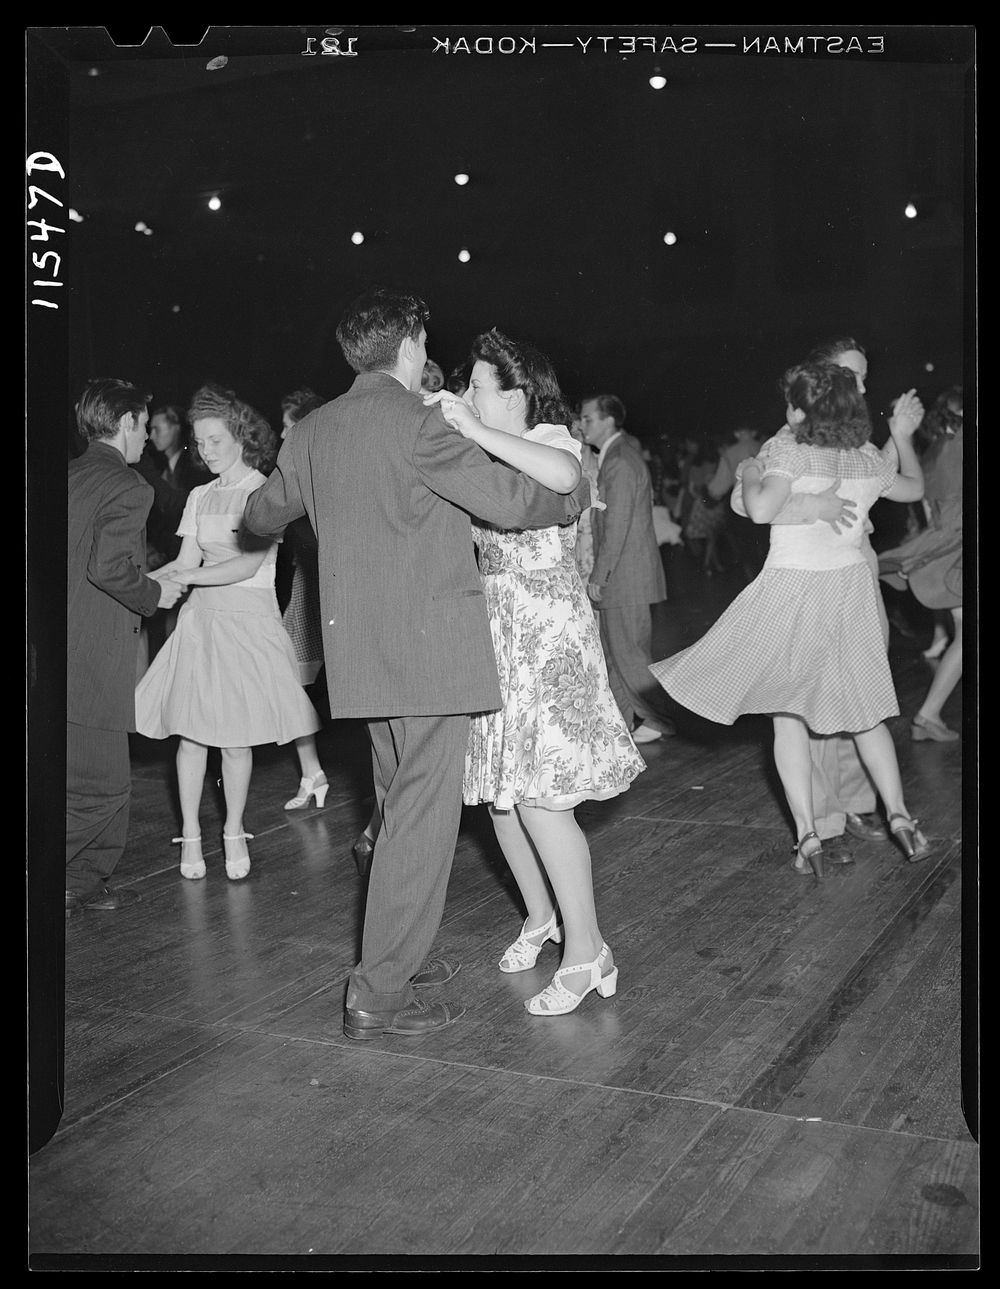 Washington, D.C. Couples dancing at the Uline Arena. Sourced from the Library of Congress.